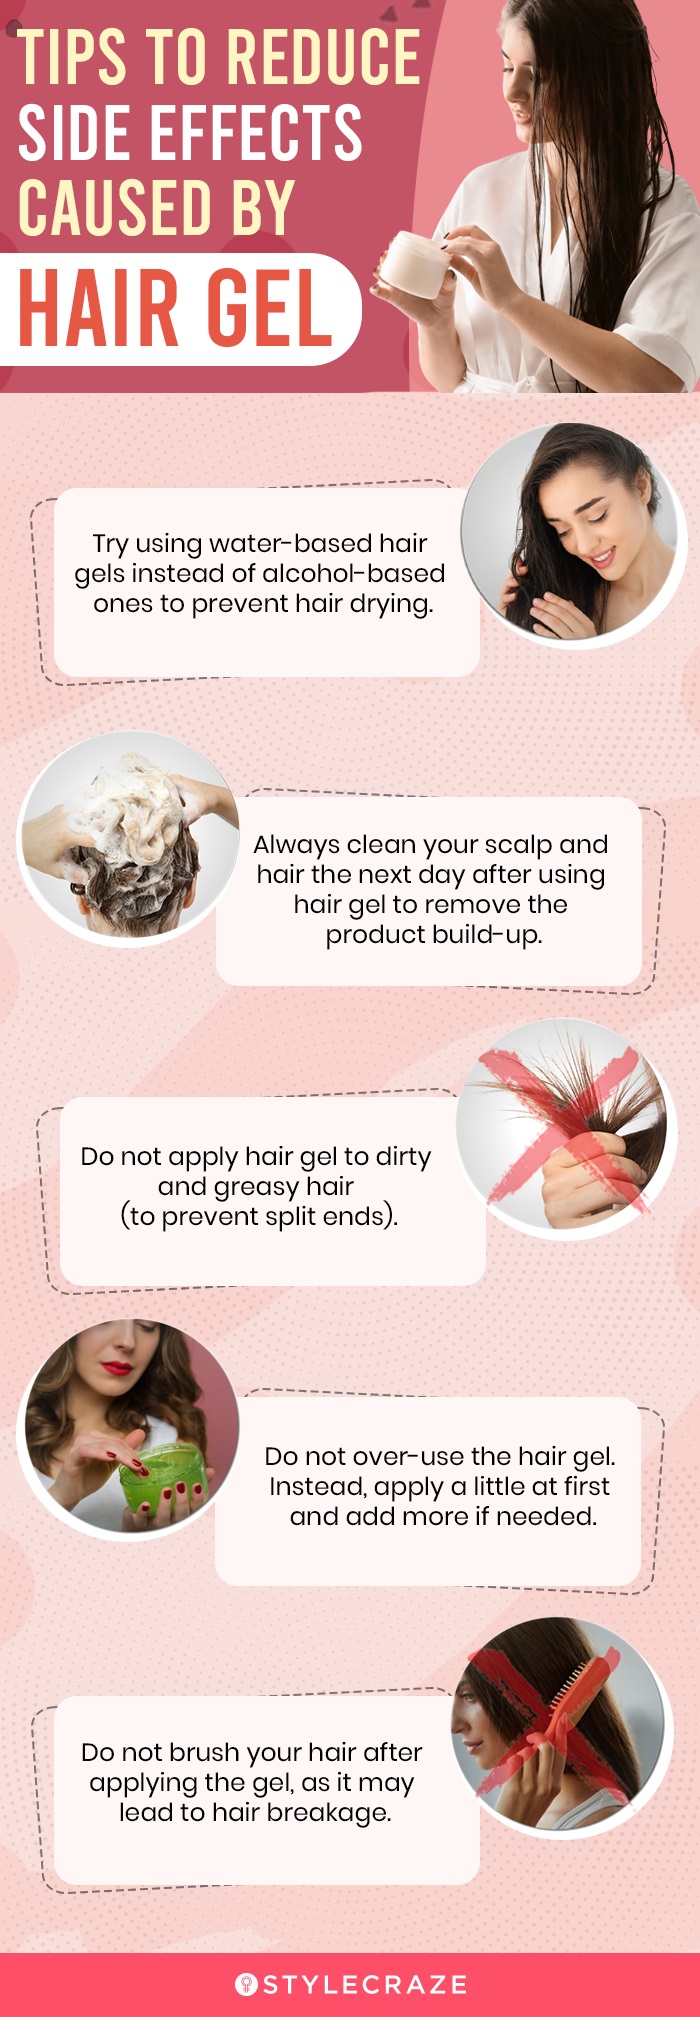 tips to reduce side effects caused by hair gel [infographic]